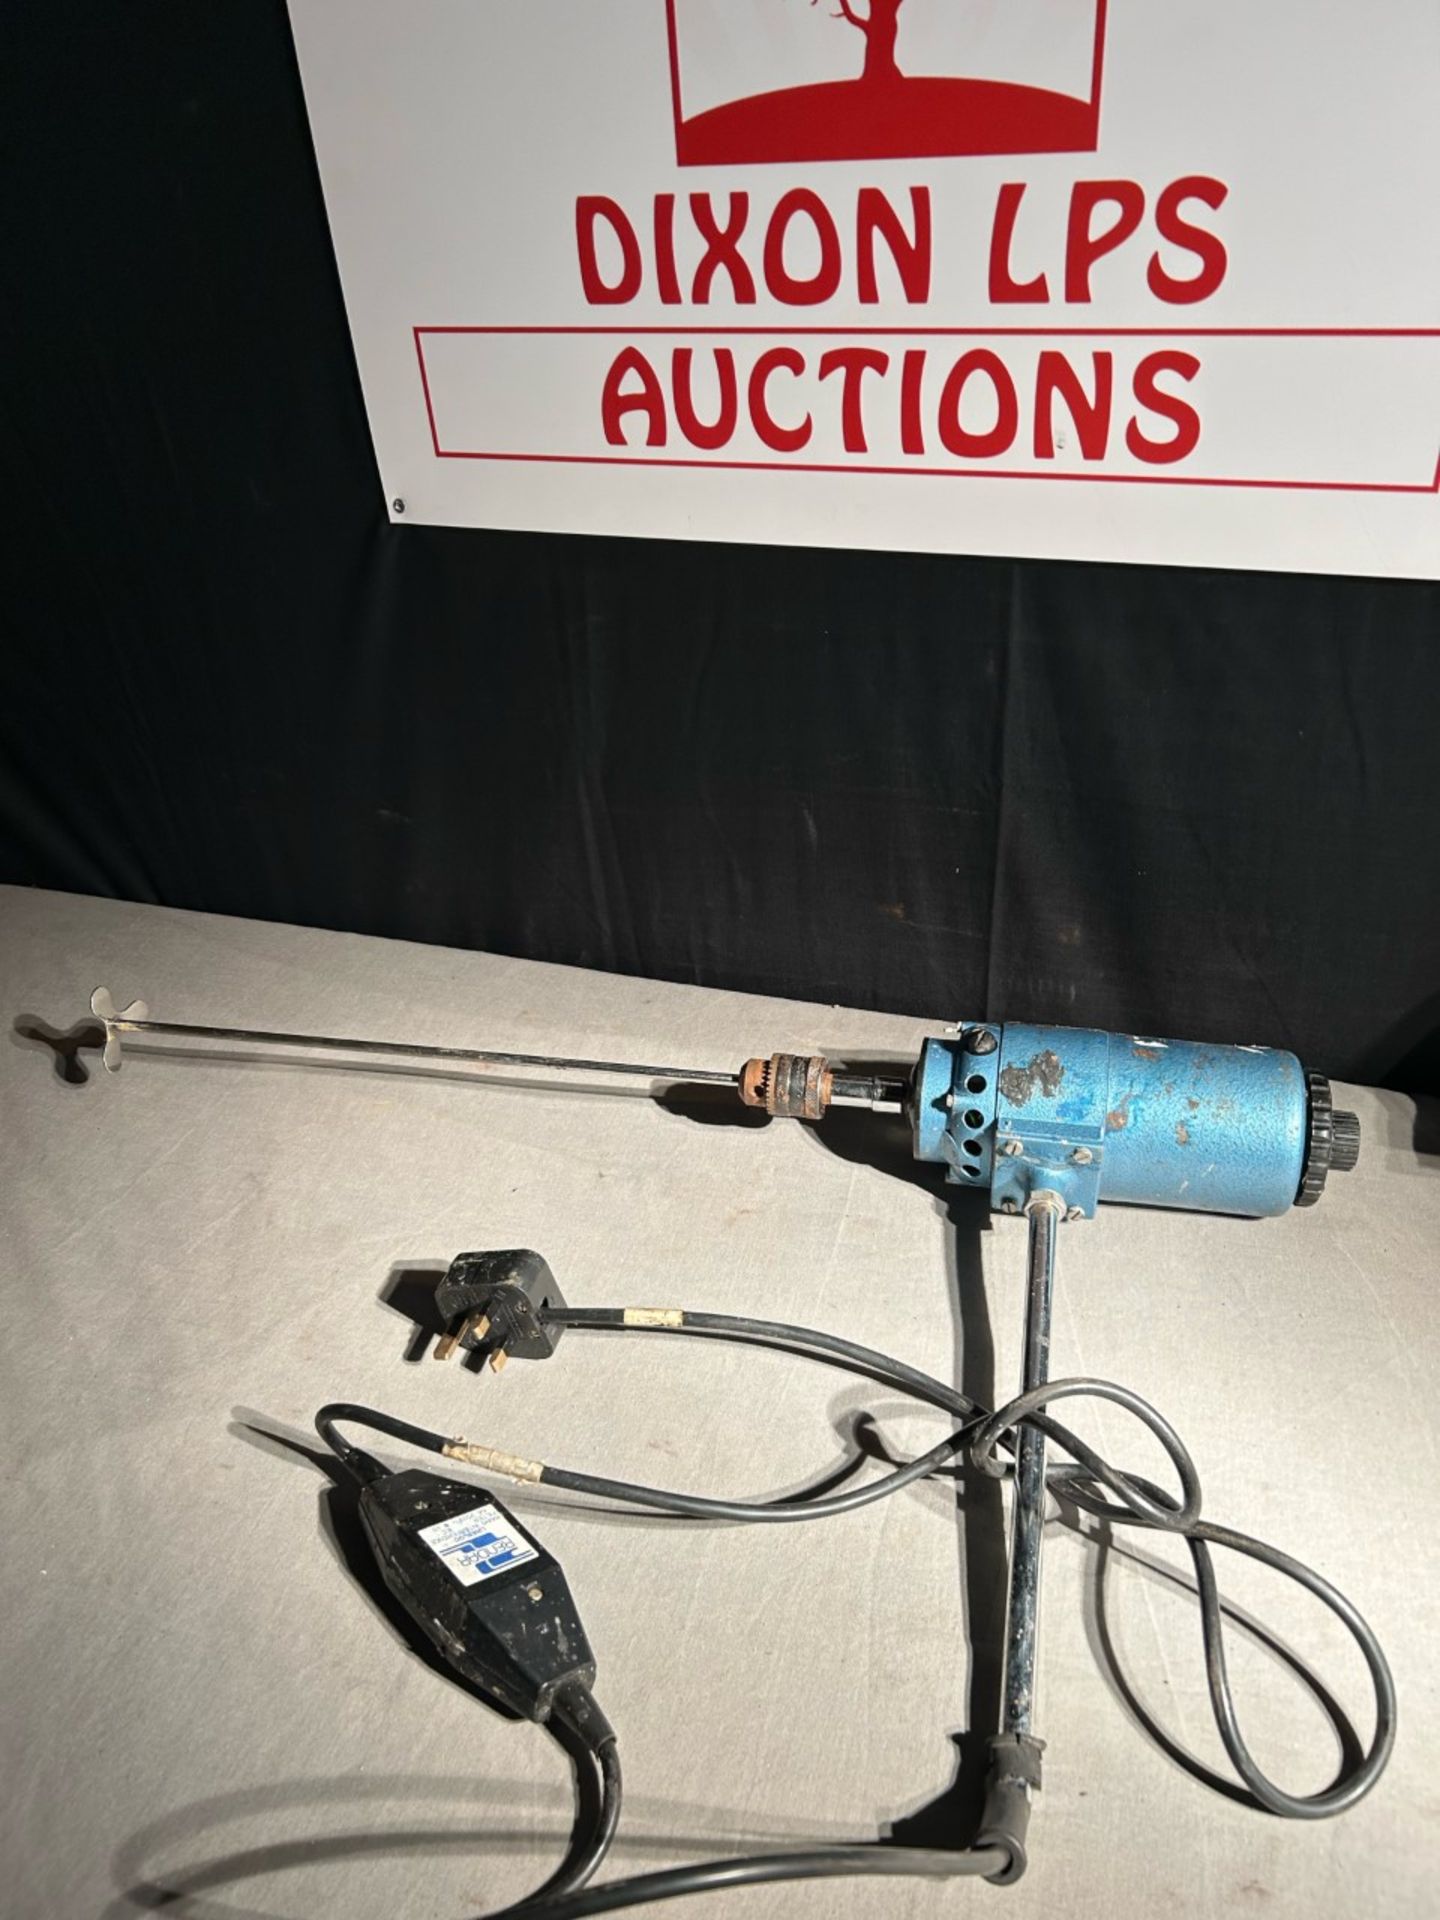 Citenco 240v motor with chuck and little mixer attachment. Full working order as seen in video